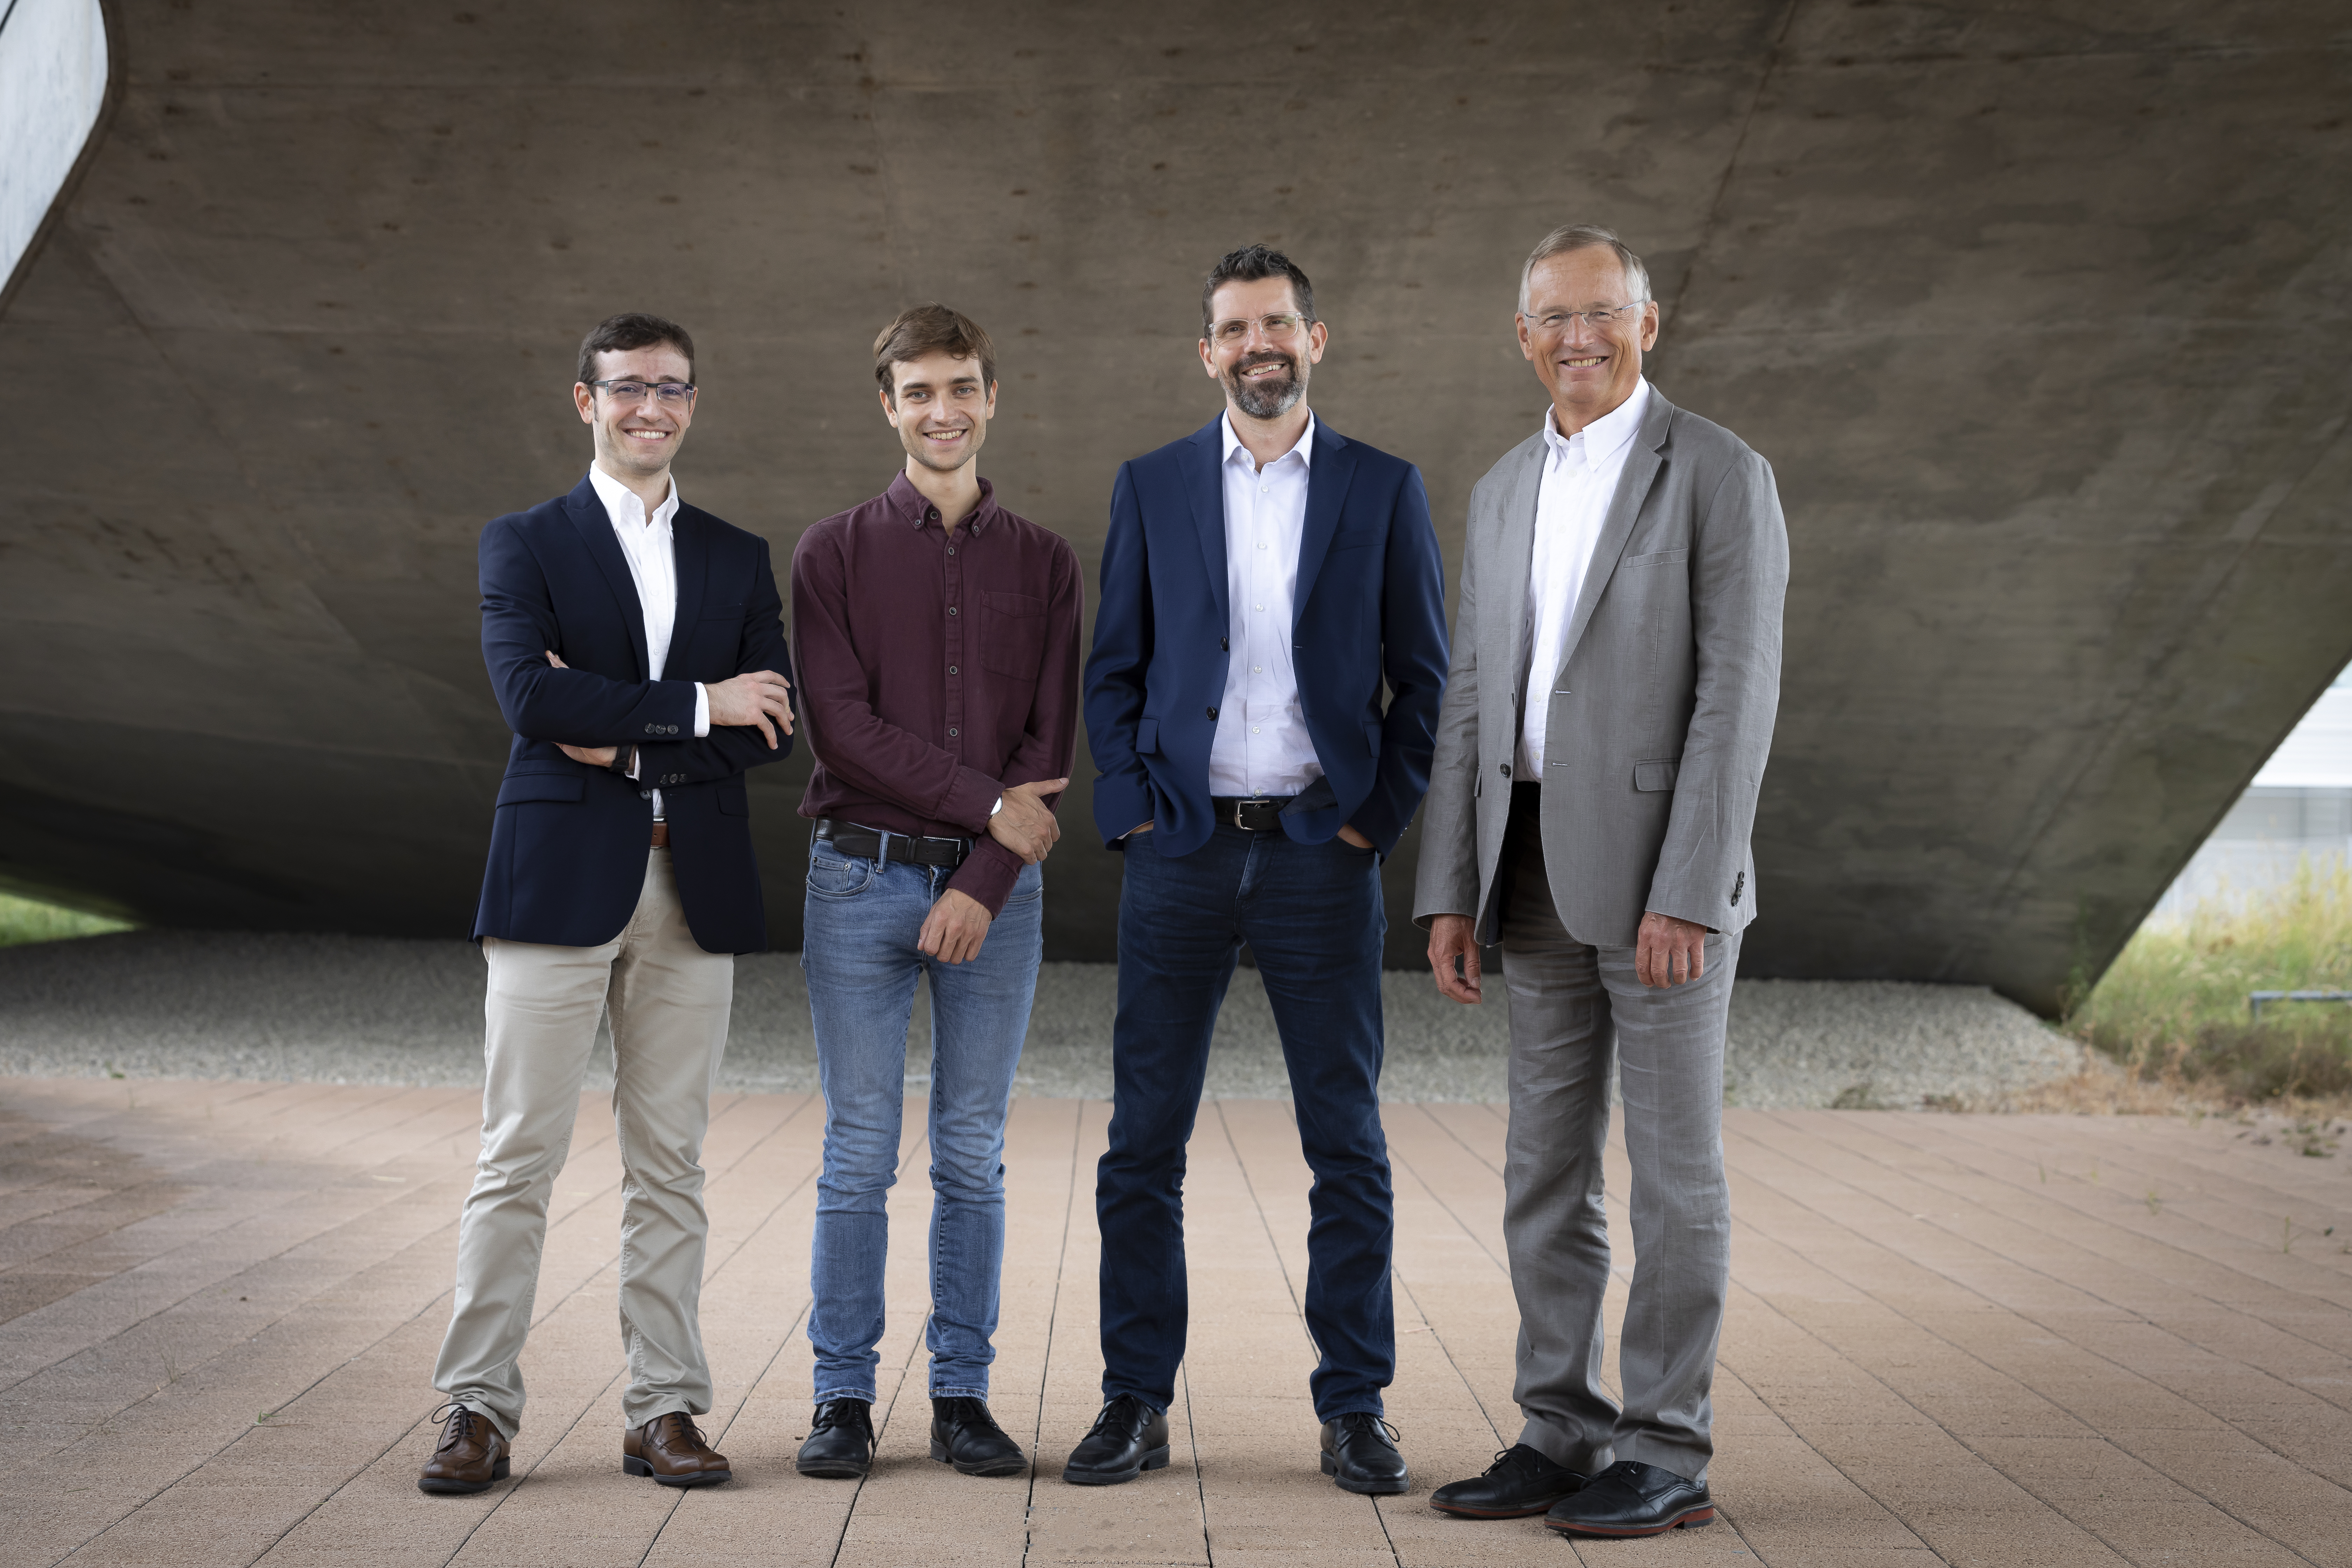 Tune Insight Co-founders: (L to R) Juan R. Troncoso Pastoriza, Romain Bouy, Frederic Pont and Jean-Pierre Hubaux